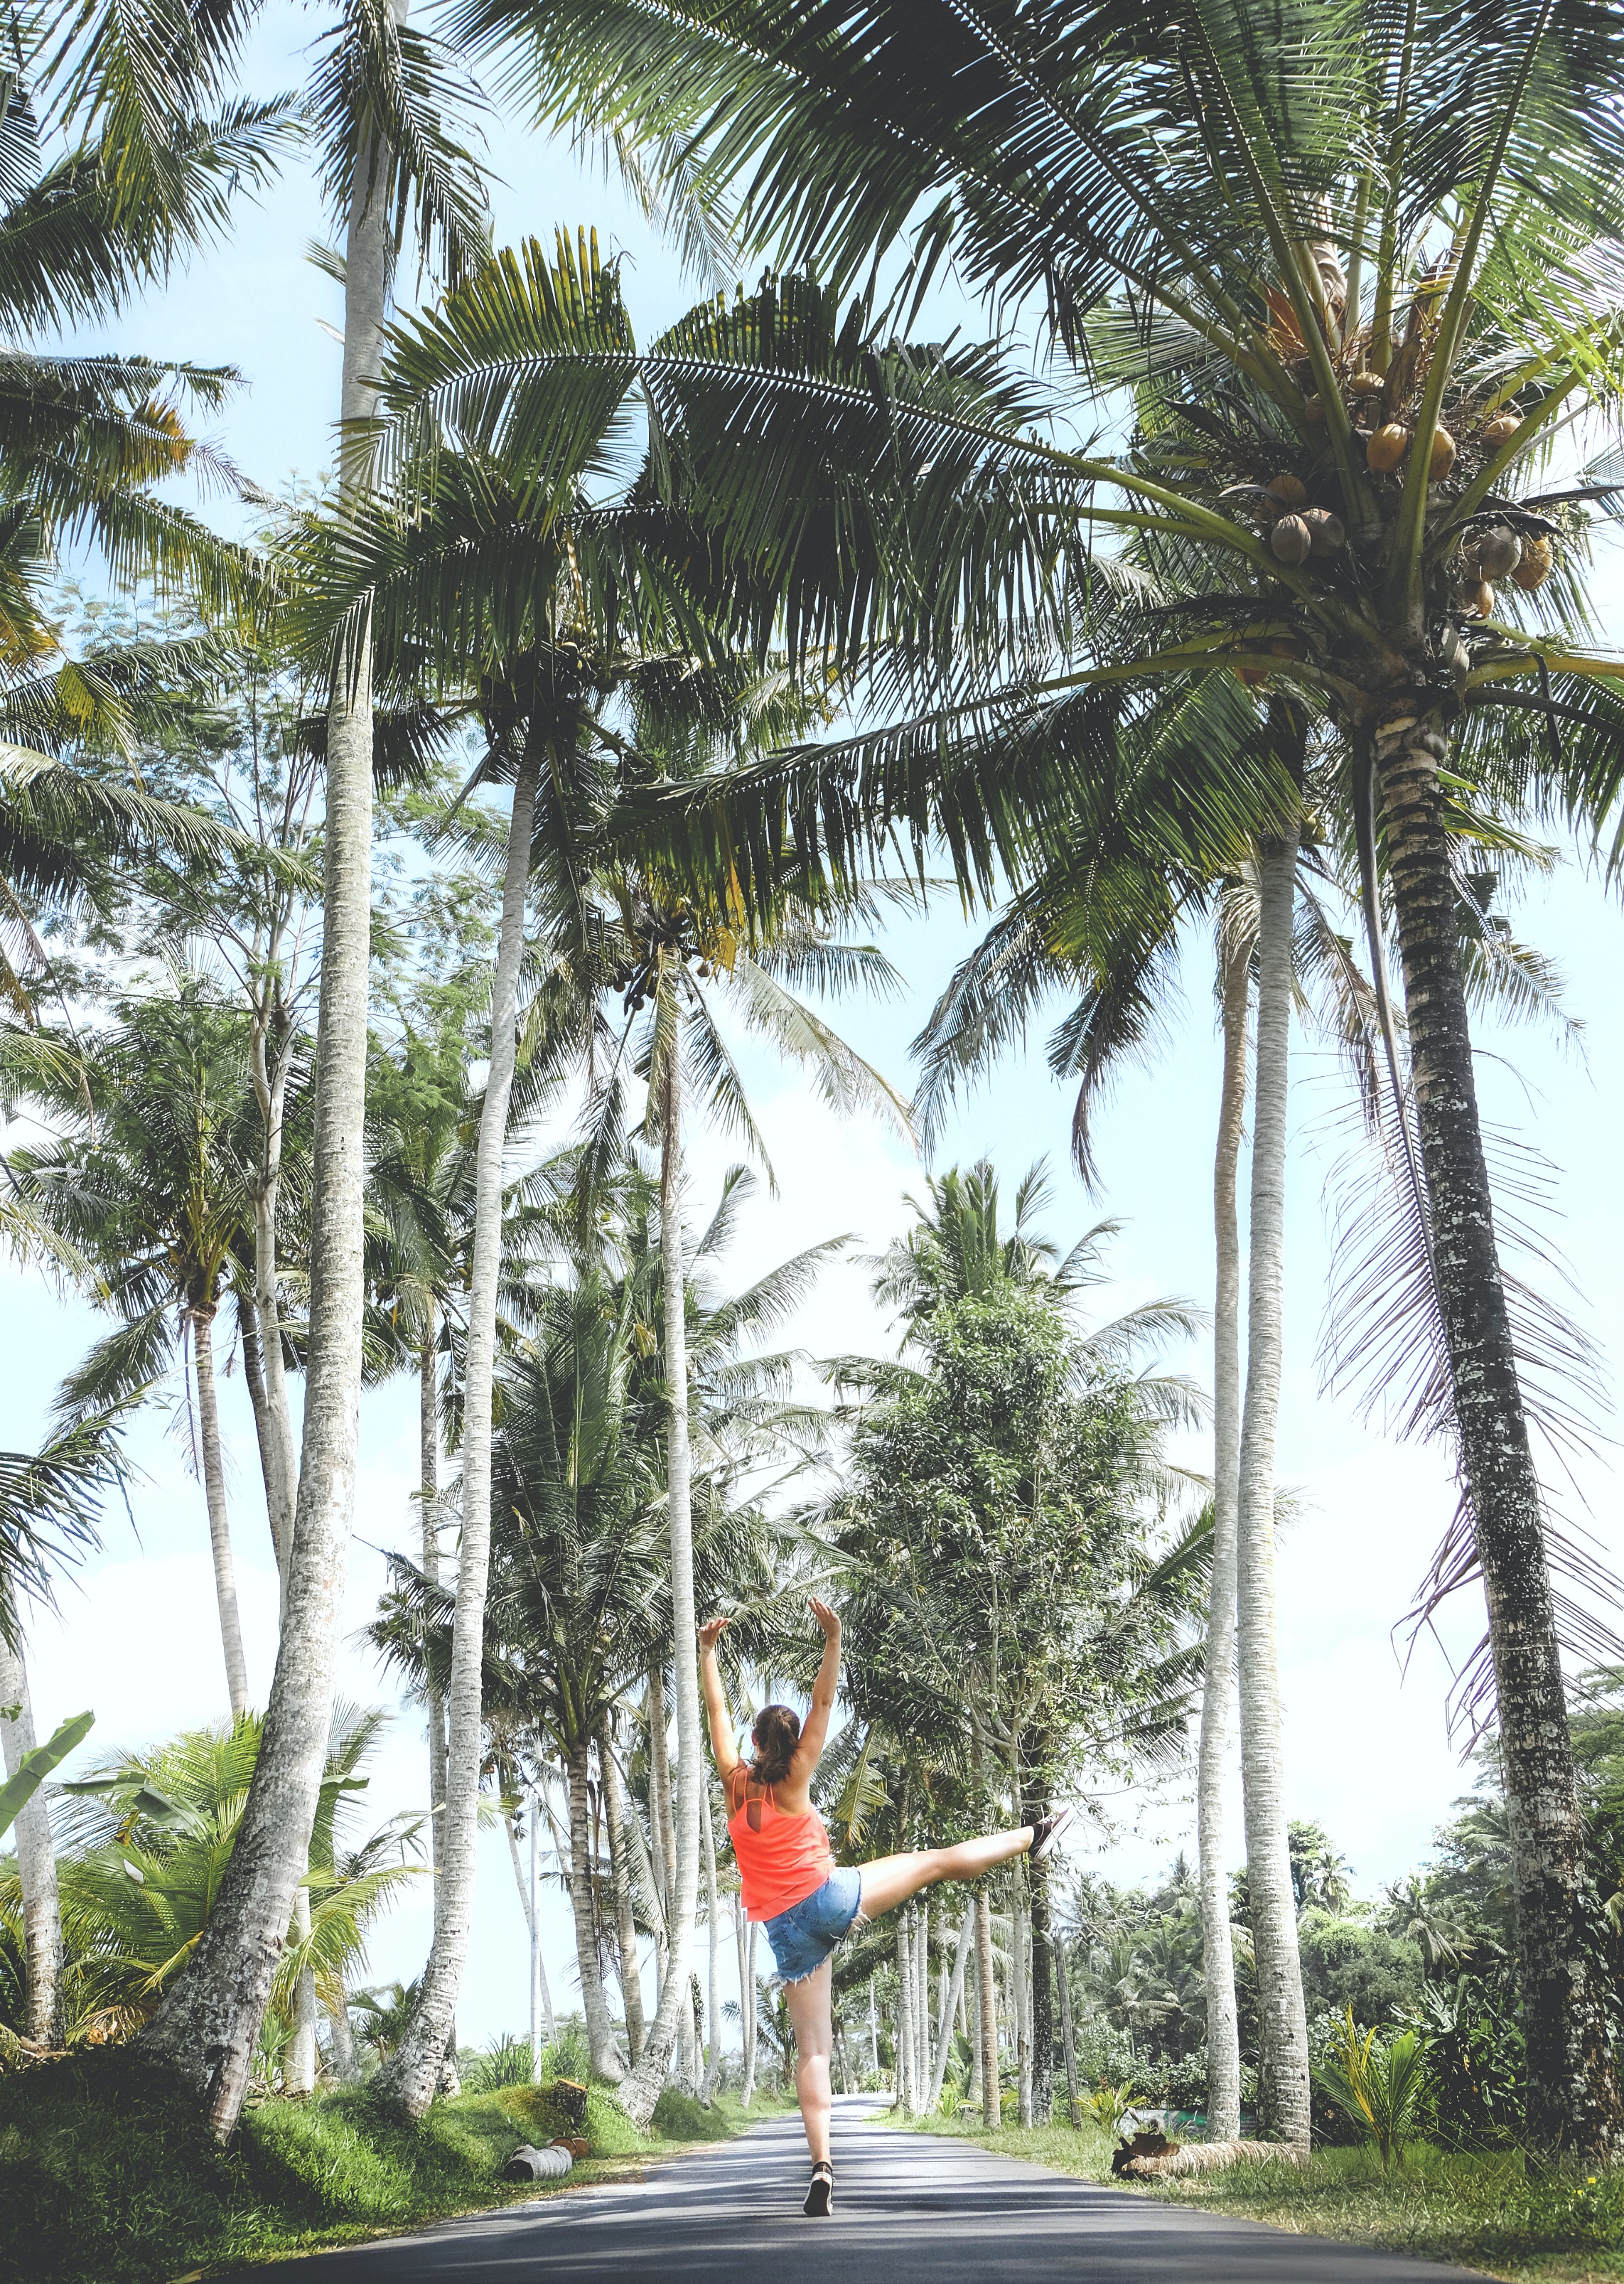 Palm trees are shown, a woman in the center of two rows of them jumps in the air.